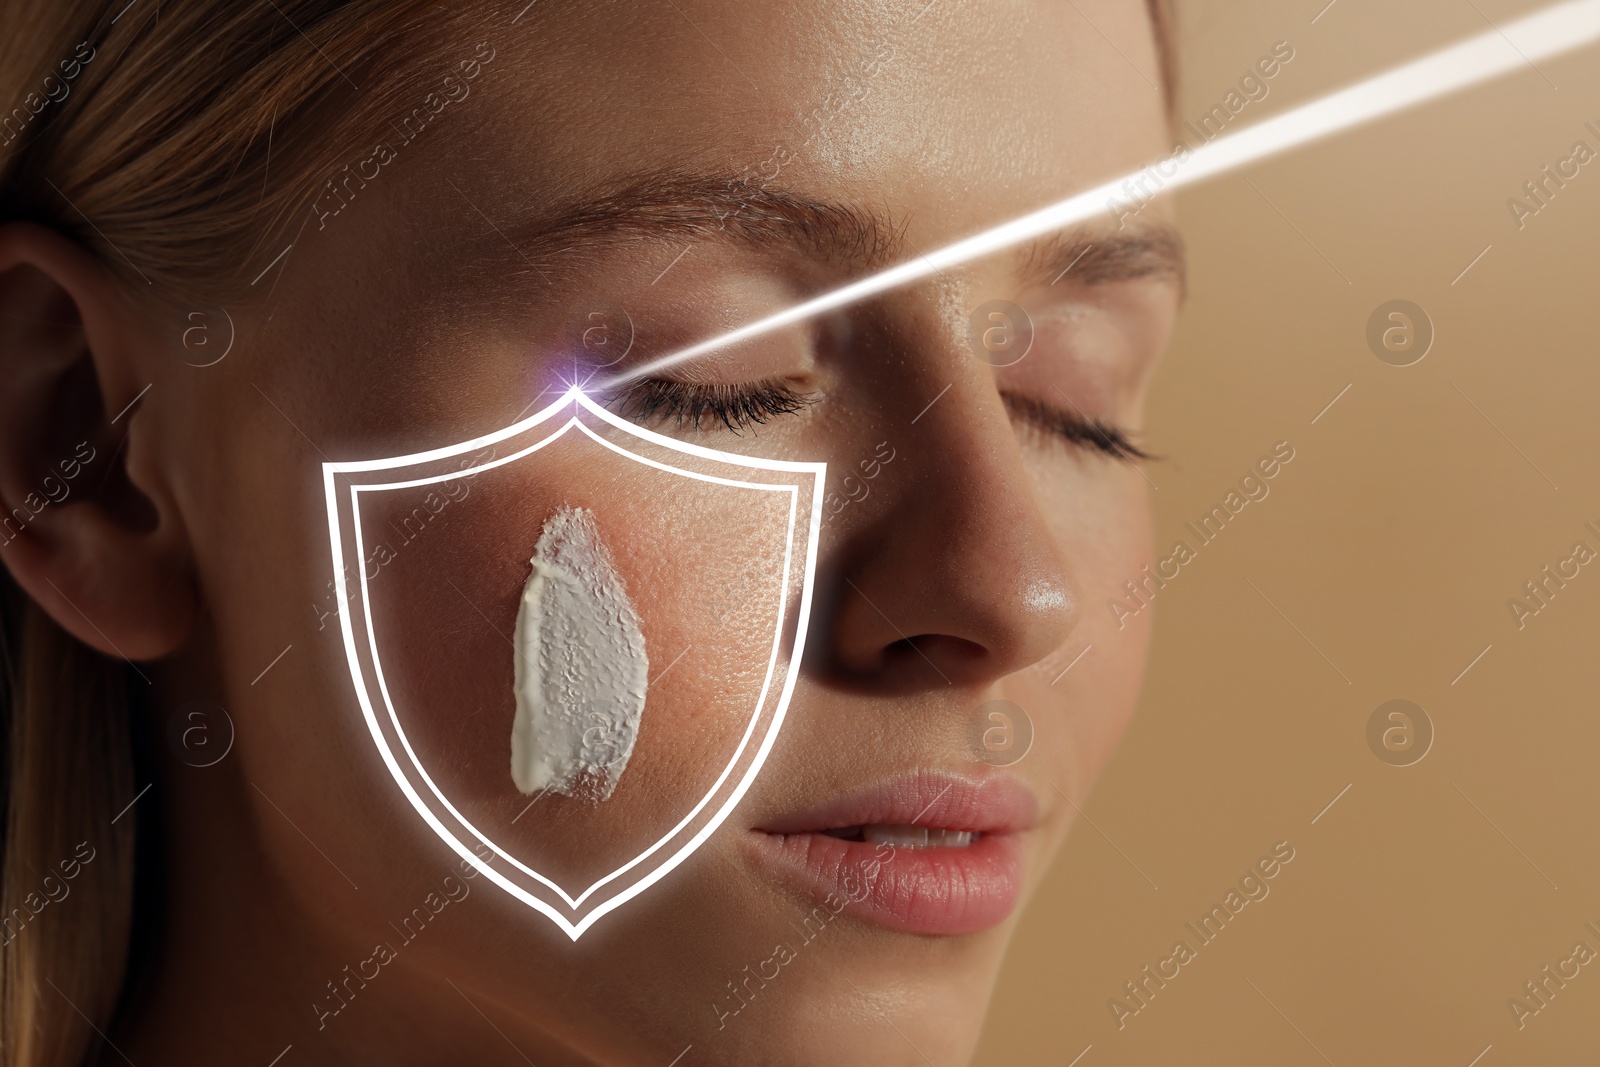 Image of Sun protection care. Beautiful woman with sunscreen on face against beige background, space for text. Illustration of shield as SPF